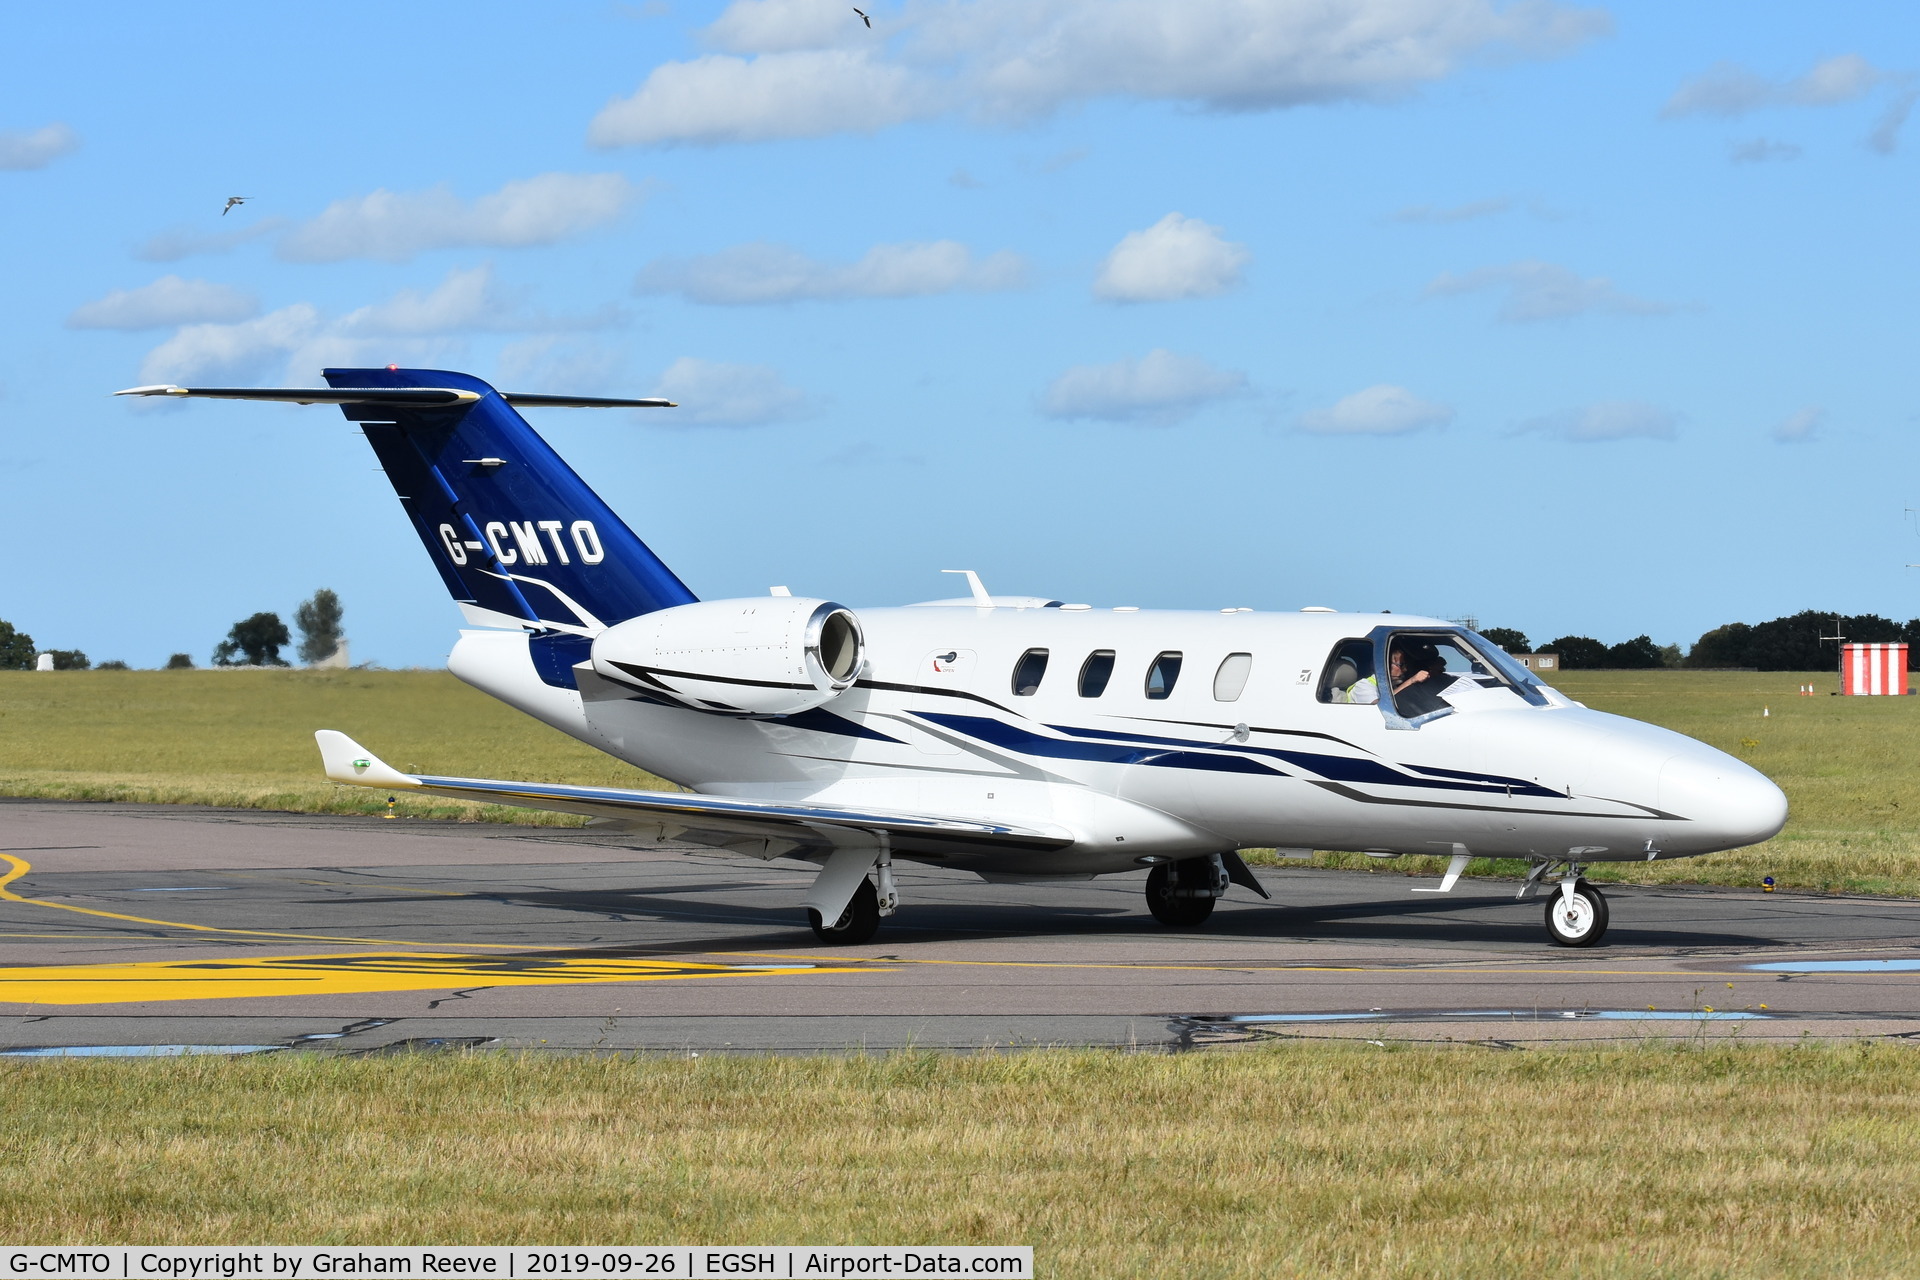 G-CMTO, 2014 Cessna 525 Citation M2 C/N 525-0848, Departing from Norwich.